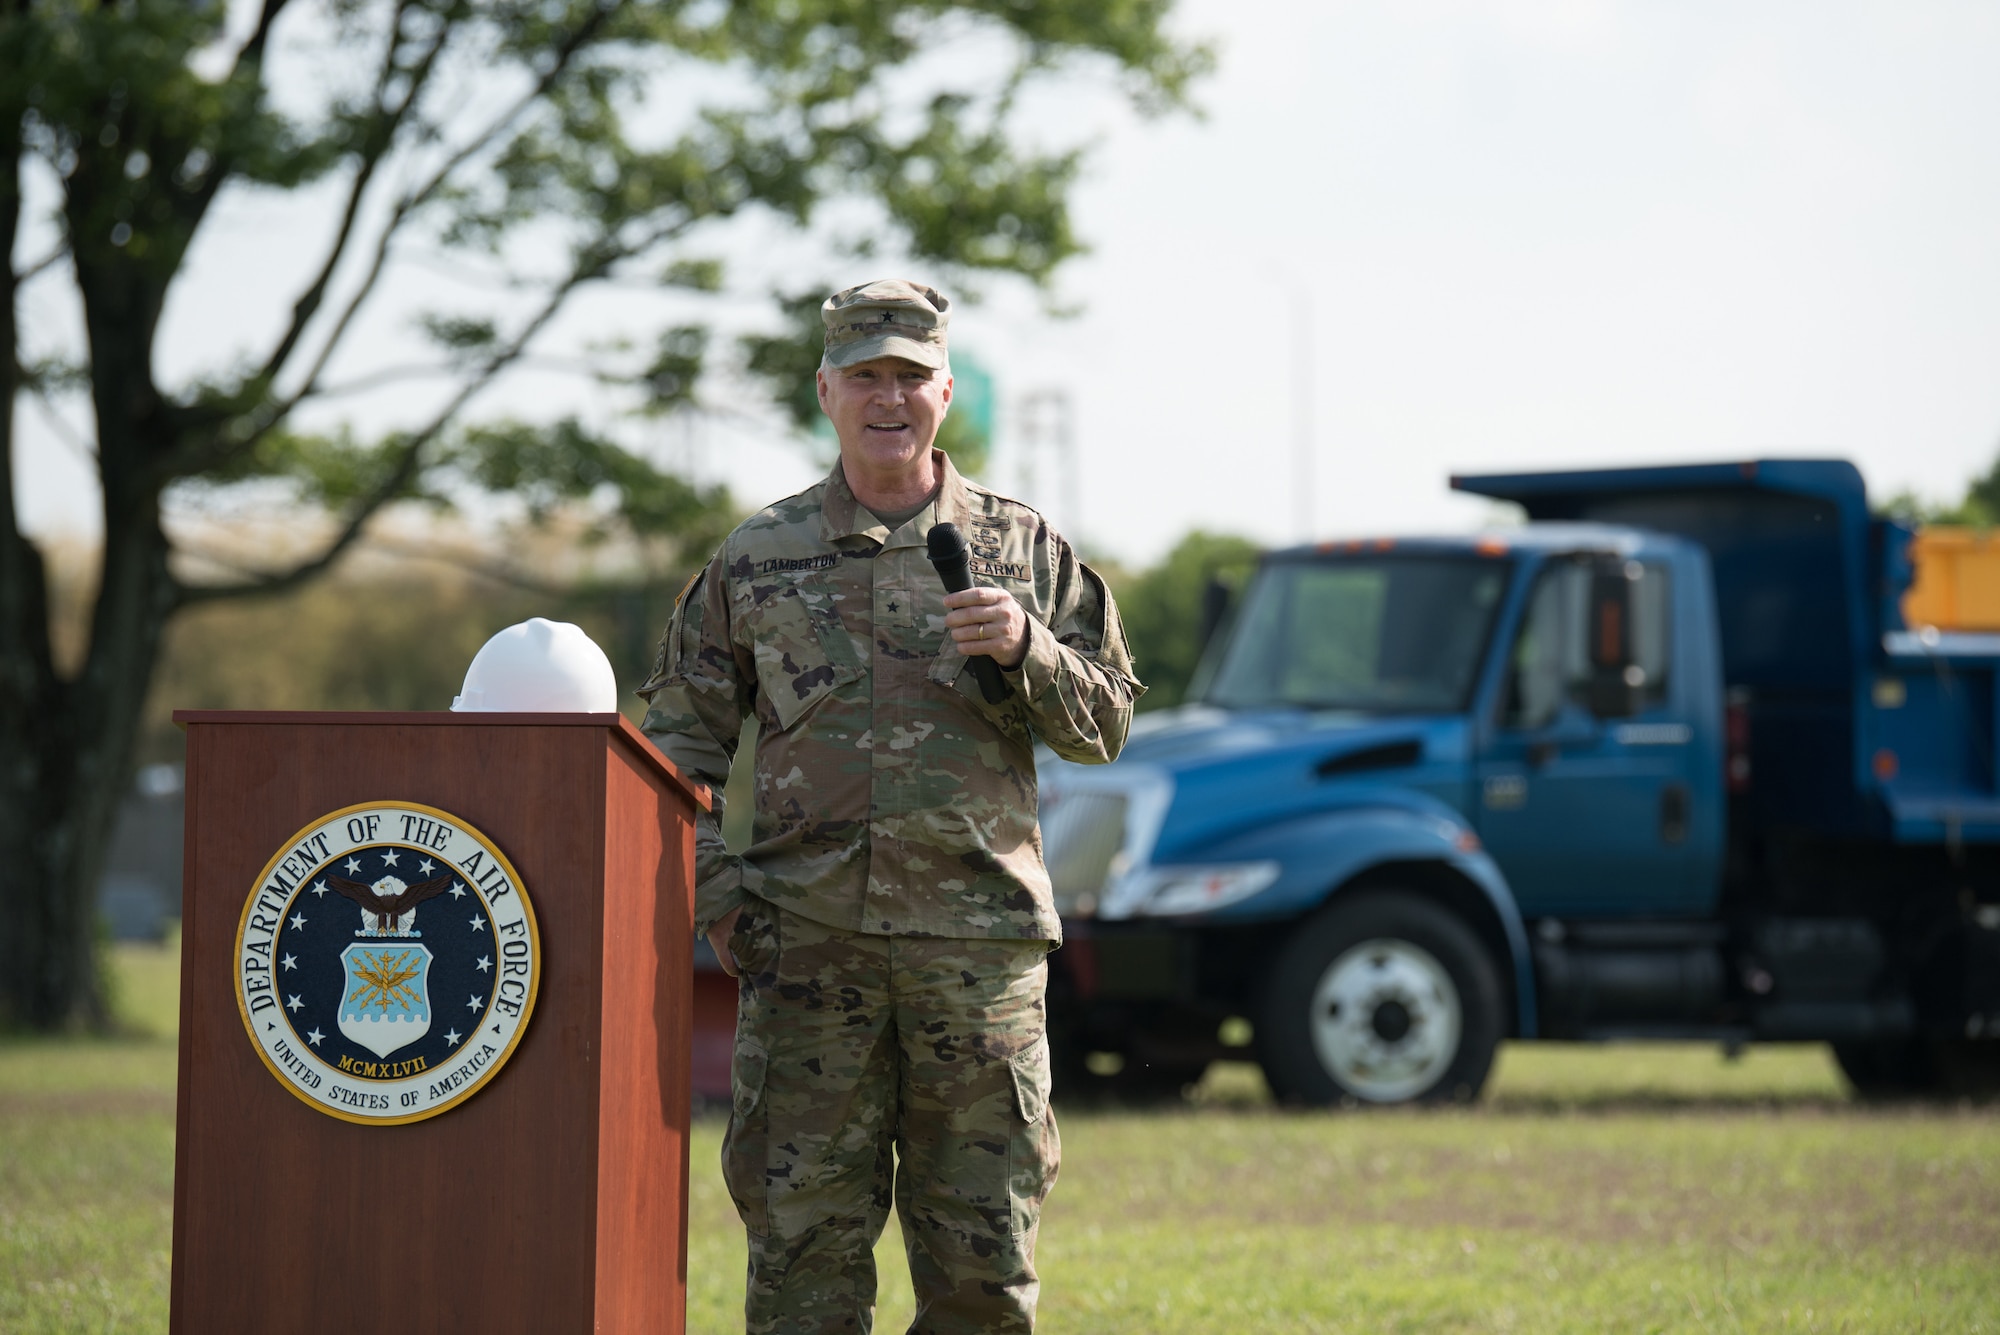 Brig. Gen. Hal Lamberton, adjutant general for the Commonwealth of Kentucky, speaks to a crowd of Airmen, family and friends during the ground-breaking ceremony for a new Response Forces Facility at the Kentucky Air National Guard Base in Louisville, Ky., June 26, 2020. The 28,000-square-foot, two-story structure will house the Contingency Response Group, Security Forces Squadron, base honor guard and a medical detachment for the state’s CBRNE Enhanced Response Force Package. (U.S. Air National Guard photo by Phil Speck)